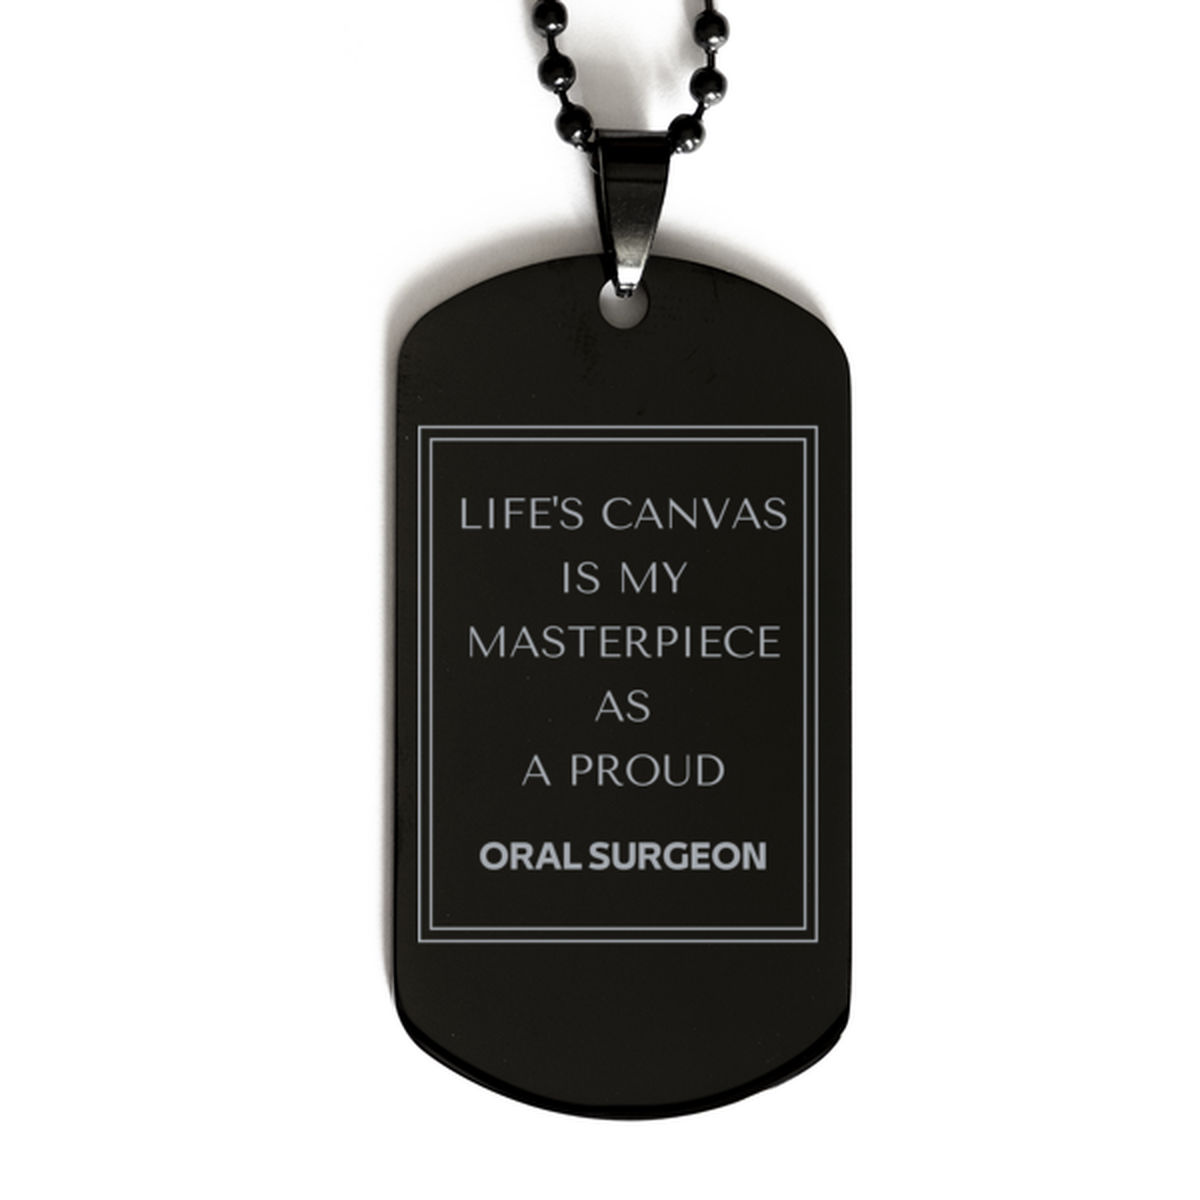 Proud Oral Surgeon Gifts, Life's canvas is my masterpiece, Epic Birthday Christmas Unique Black Dog Tag For Oral Surgeon, Coworkers, Men, Women, Friends